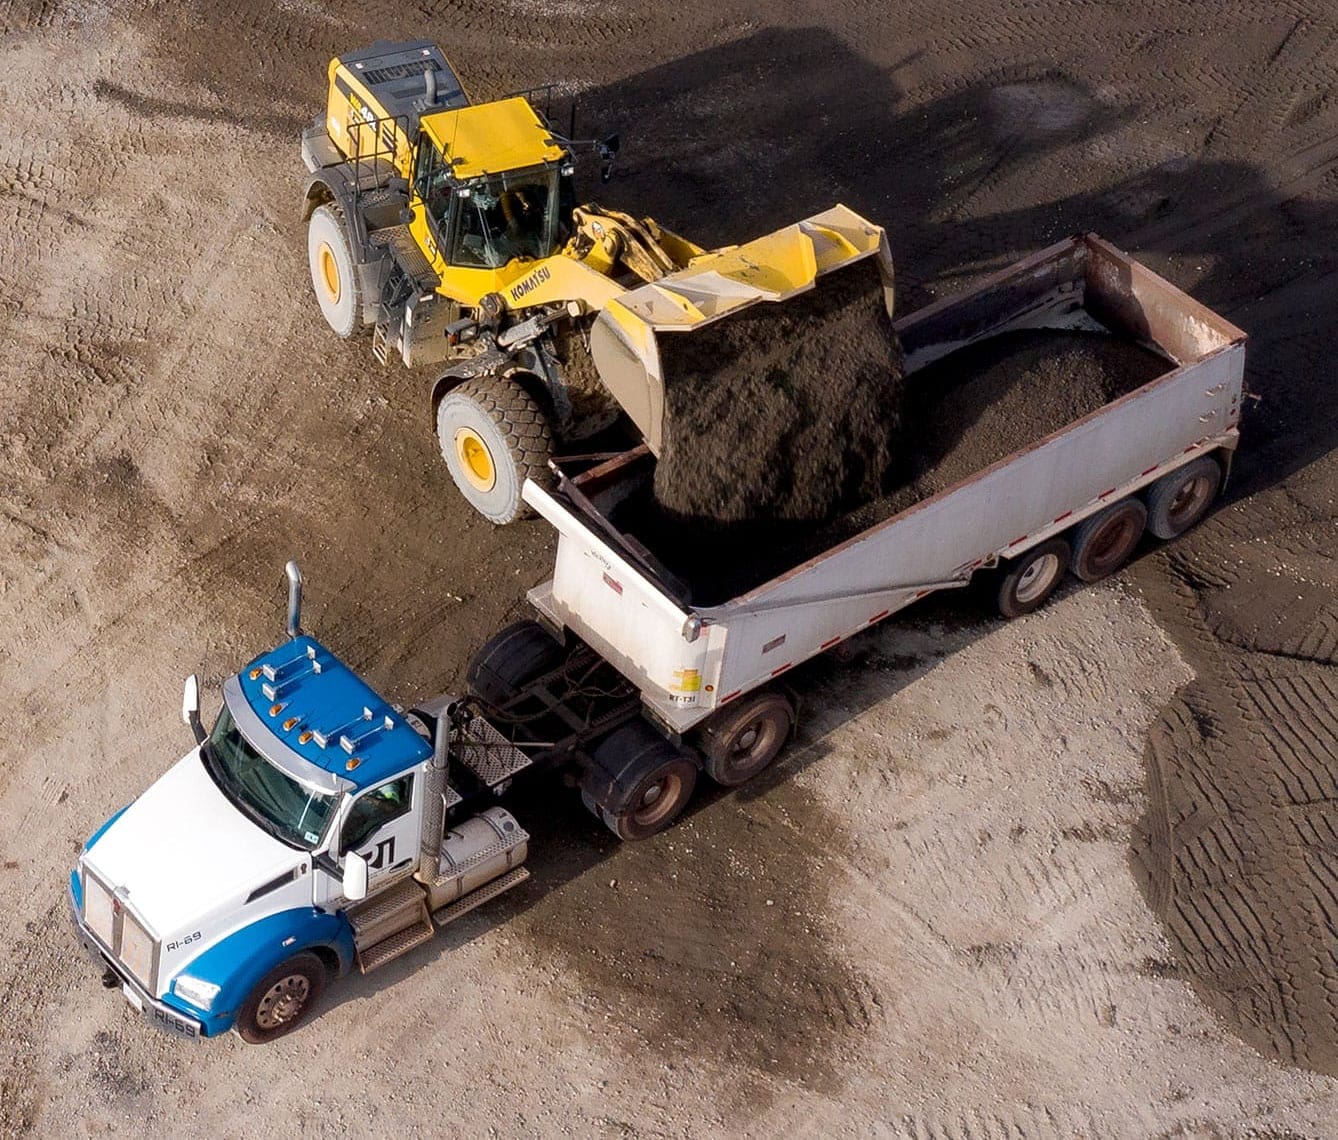 A front loader scooping dirt into a dump truck